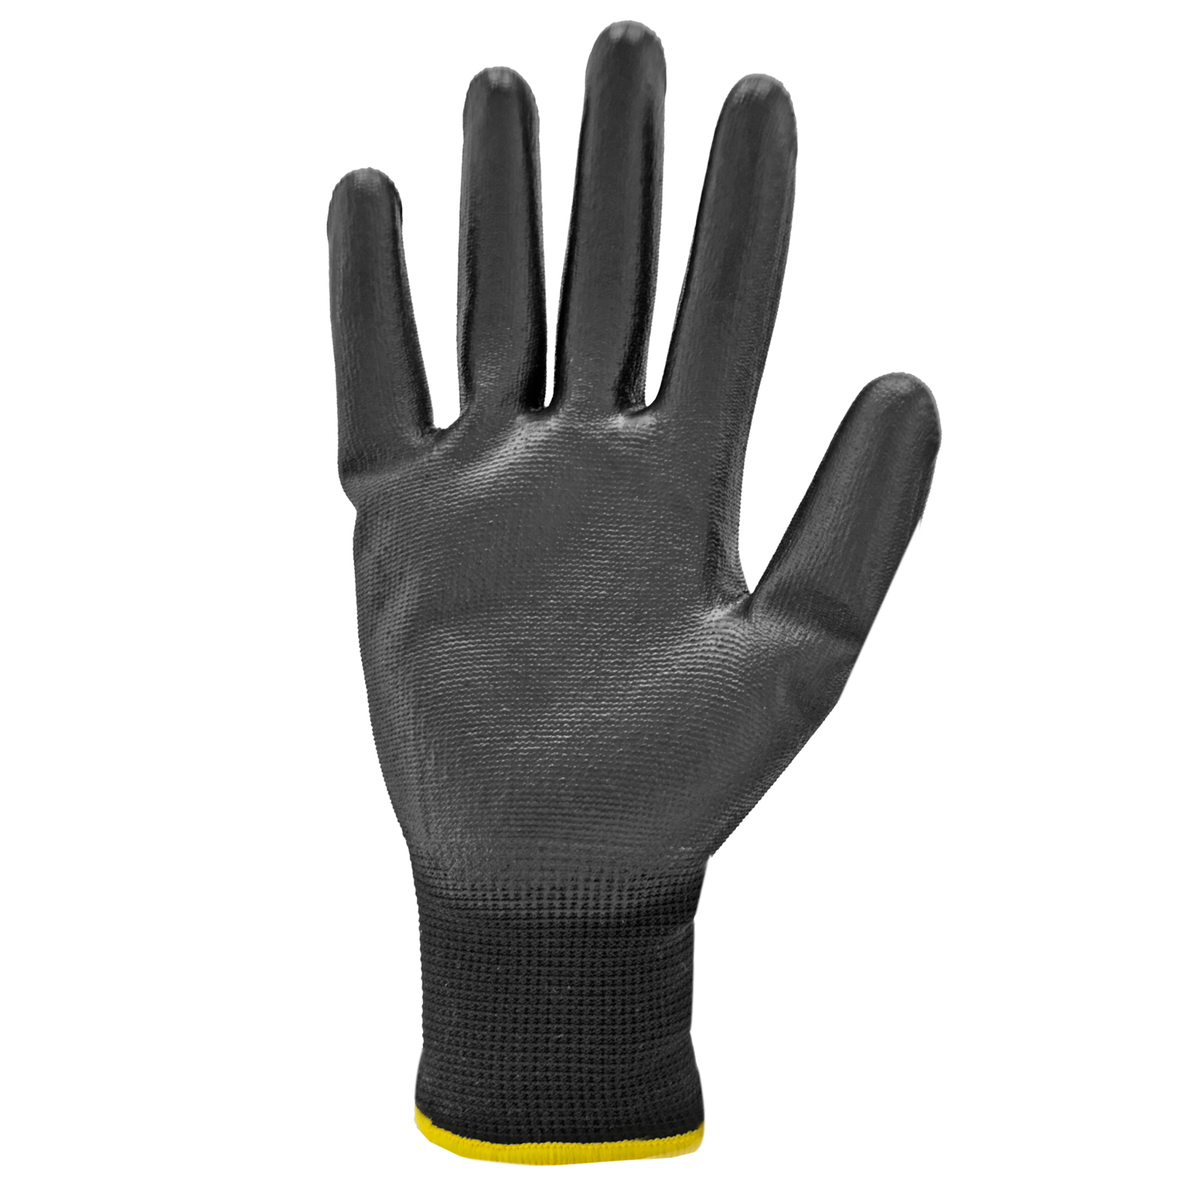 Thin Work Gloves with PU-Dipped Monkey Grip - 12-Pack